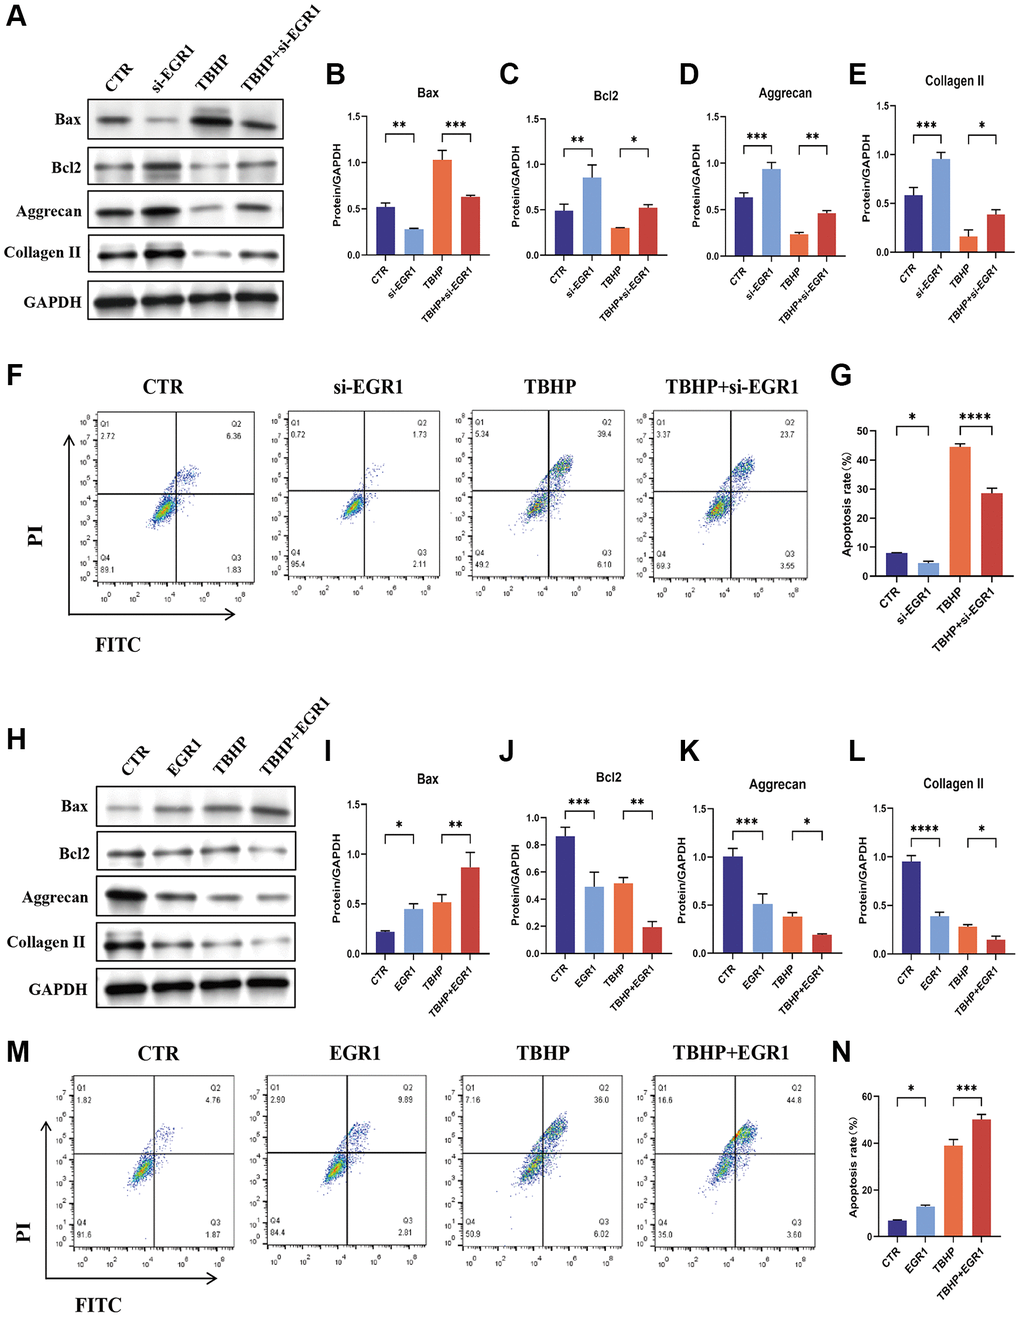 EGR1 regulates apoptosis and ECM synthesis in NPCs. (A) NPCs were transfected with 25 nM CTR siRNA or EGR1 siRNA-1 for 24 hours and then treated with 50 μM TBHP for 24 hours before protein extraction. The protein expression of Bax, Bcl-2, aggrecan, and collagen II was determined by western blotting. (B–E) Quantitative analysis of Bax, Bcl-2, aggrecan, and collagen II protein levels. (F) Representative flow cytometry images showing that EGR1 siRNA protected NPCs from TBHP-induced apoptosis. (G) Quantitative analysis of the NPC apoptosis rate. (H) NPCs were transfected with 5 μg of the EGR1 expression plasmid or the corresponding control vector. After 48 hours, the cells were treated with 50 μM TBHP for 24 hours. Total cellular proteins were extracted, and the expression of Bax, Bcl-2, aggrecan, and collagen II was determined by western blotting. (I–L) Quantitative analysis of Bax, Bcl-2, aggrecan, and collagen II protein levels. (M) Representative flow cytometry images showing that EGR1 overexpression increases TBHP-induced apoptosis in NPCs. (N) Quantitative analysis of the NPC apoptosis rate. The data are expressed as the mean ± SD (n = 3). *p **p ***p ****p 